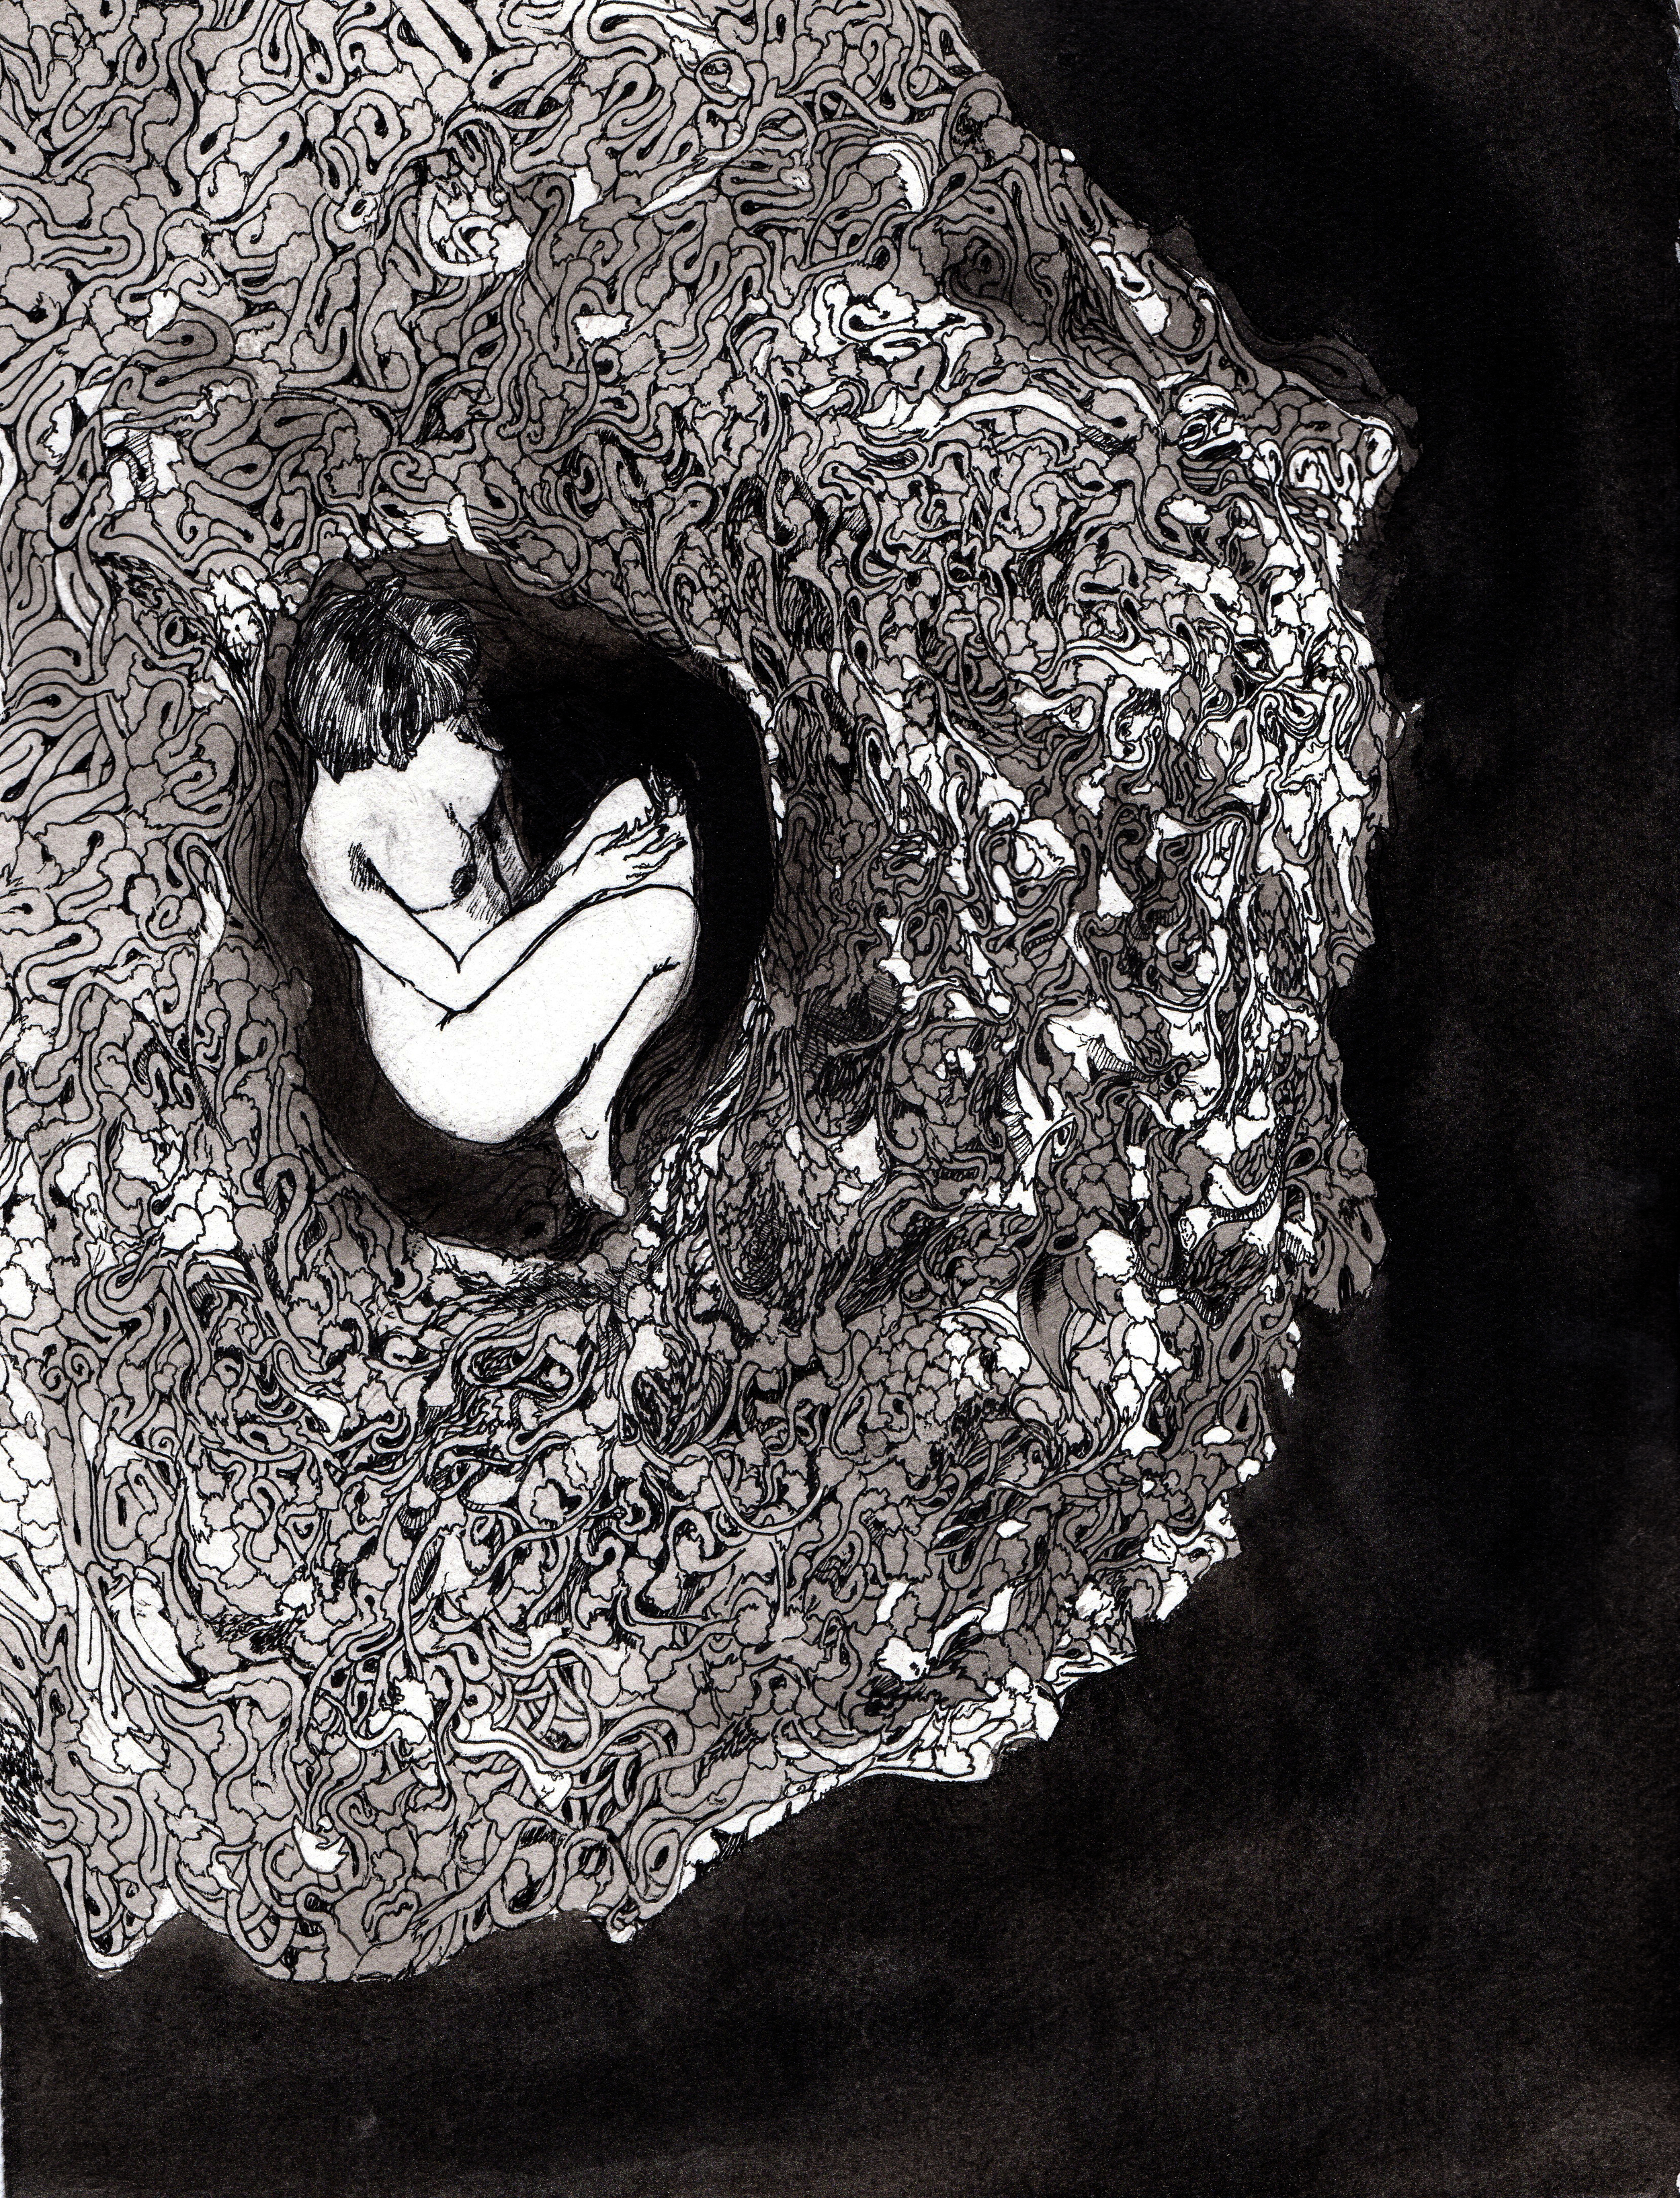    In her womb.  &nbsp;2013. 12 x 15 inches. Ink wash on paper. 